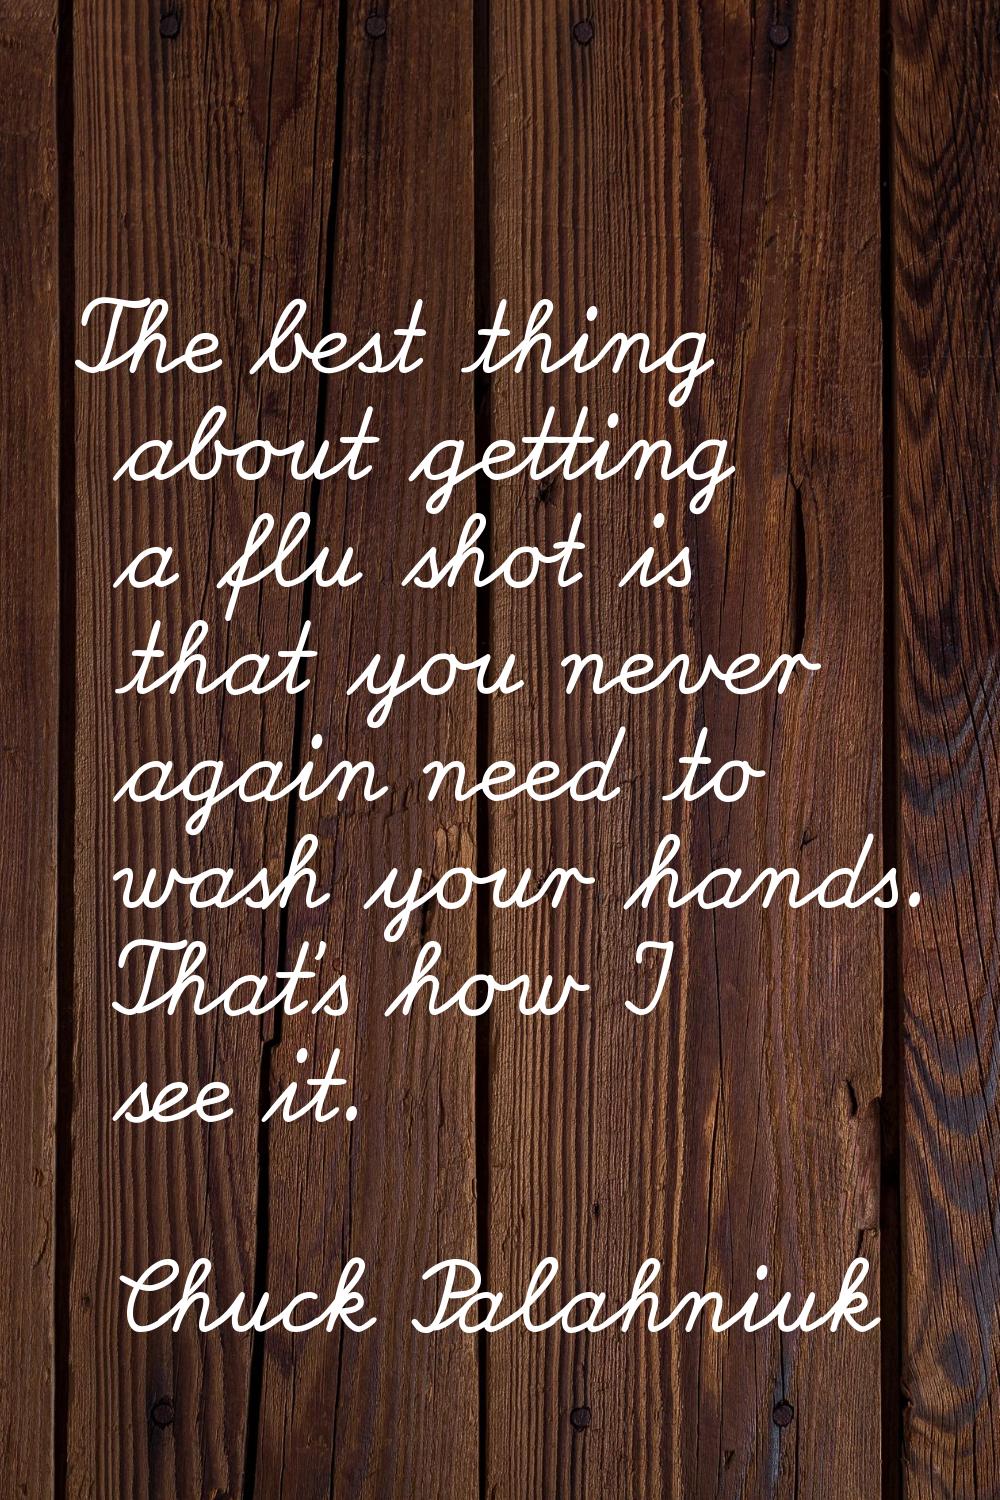 The best thing about getting a flu shot is that you never again need to wash your hands. That's how